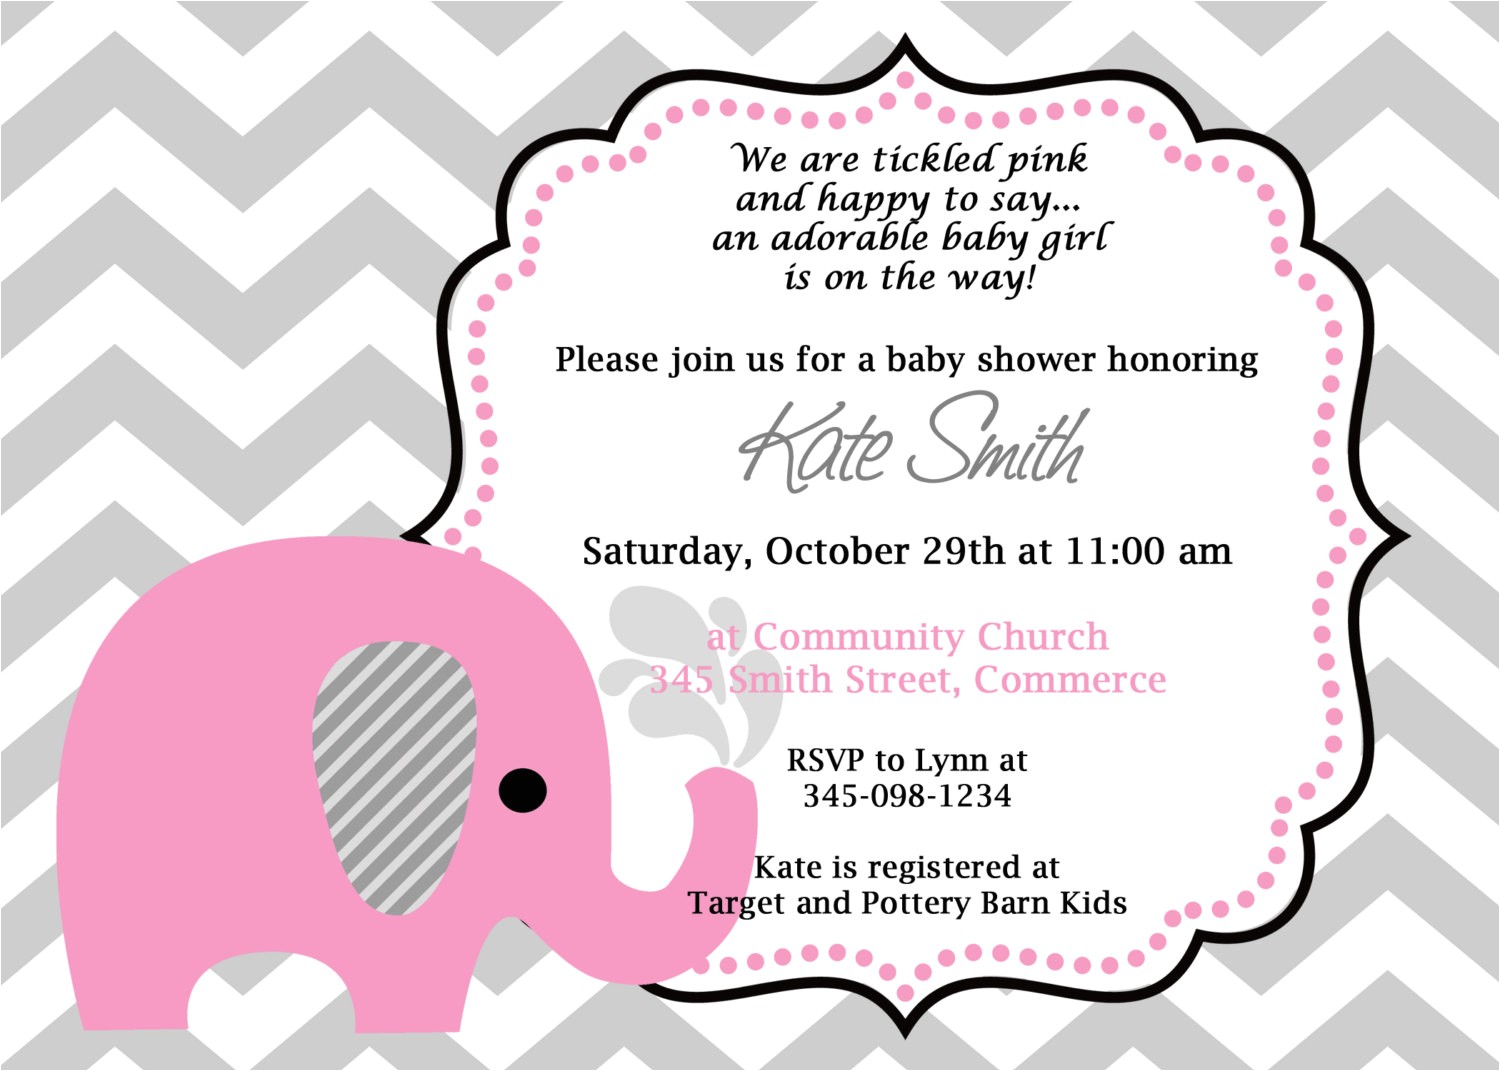 Cute Baby Shower Invite Quotes Cute Sayings for Baby Shower Invites